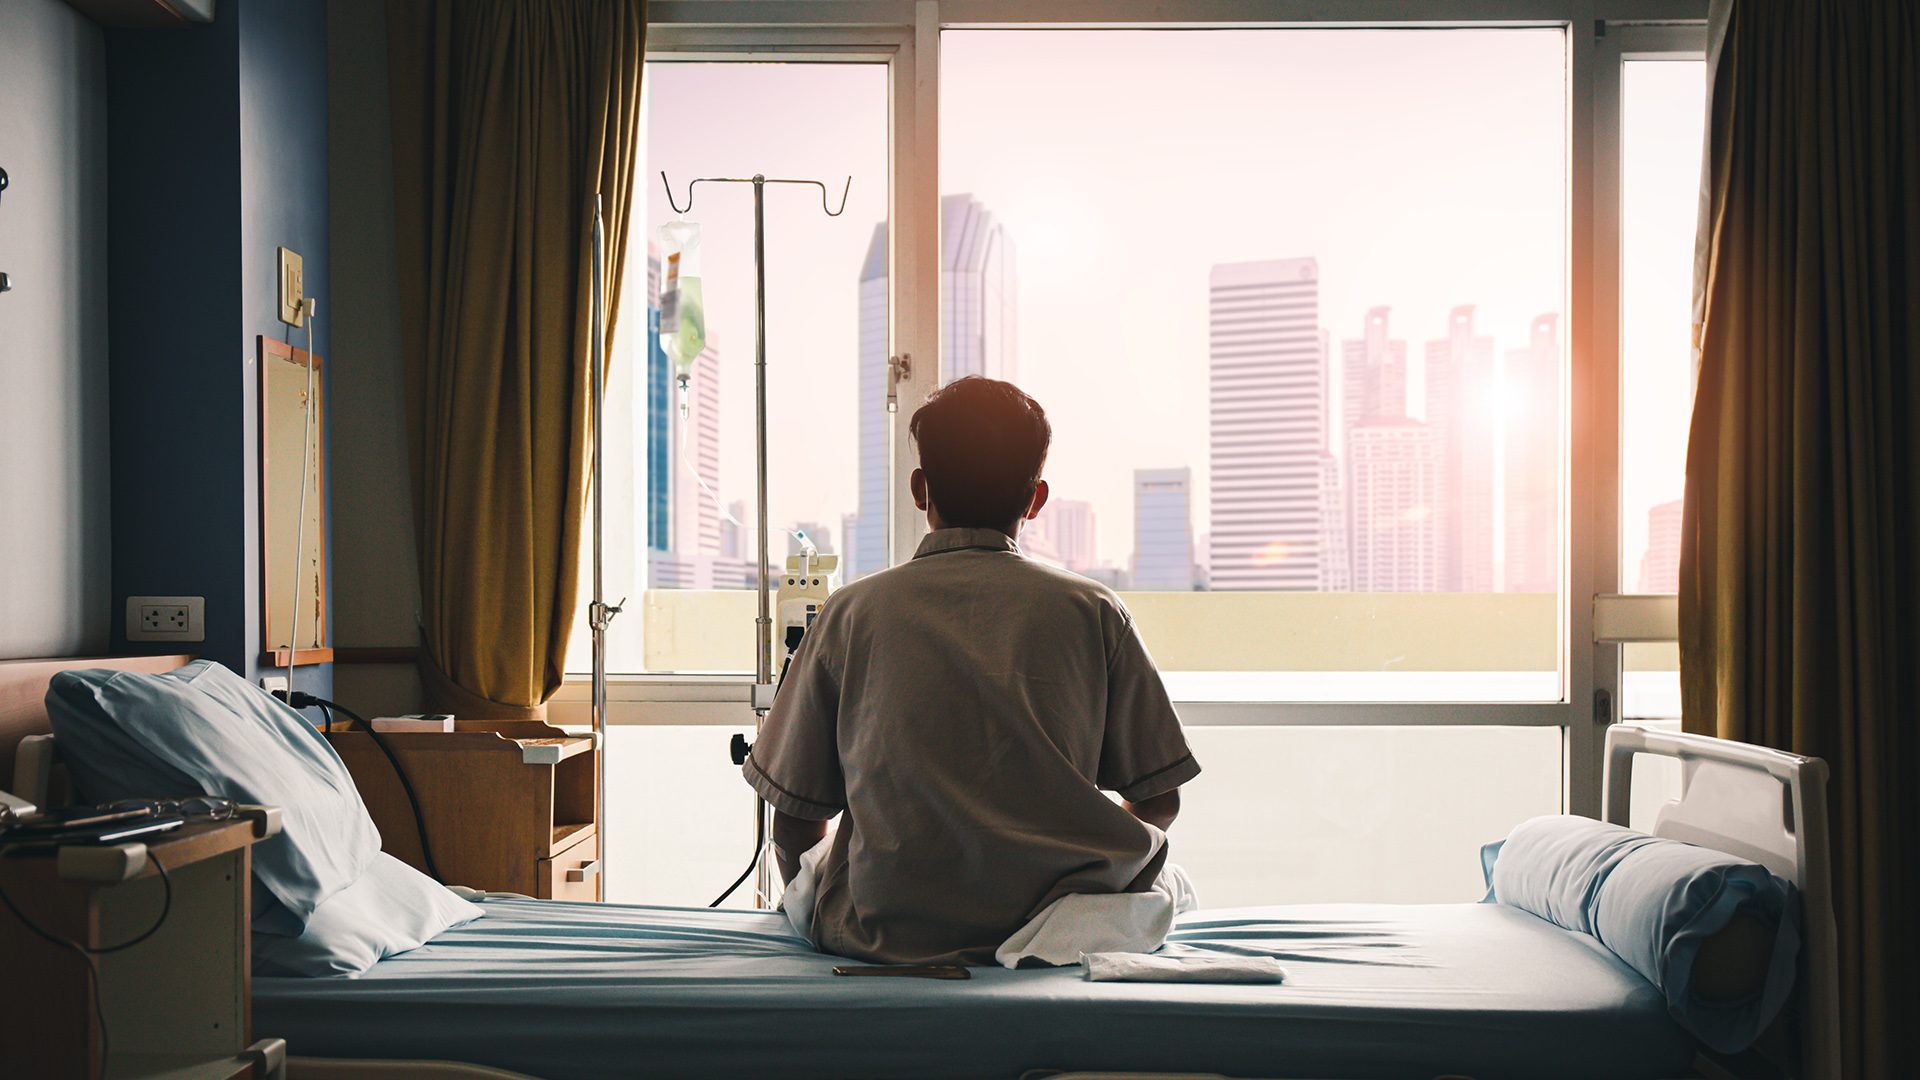 A man with his back to the camera looks out the window of his hospital room